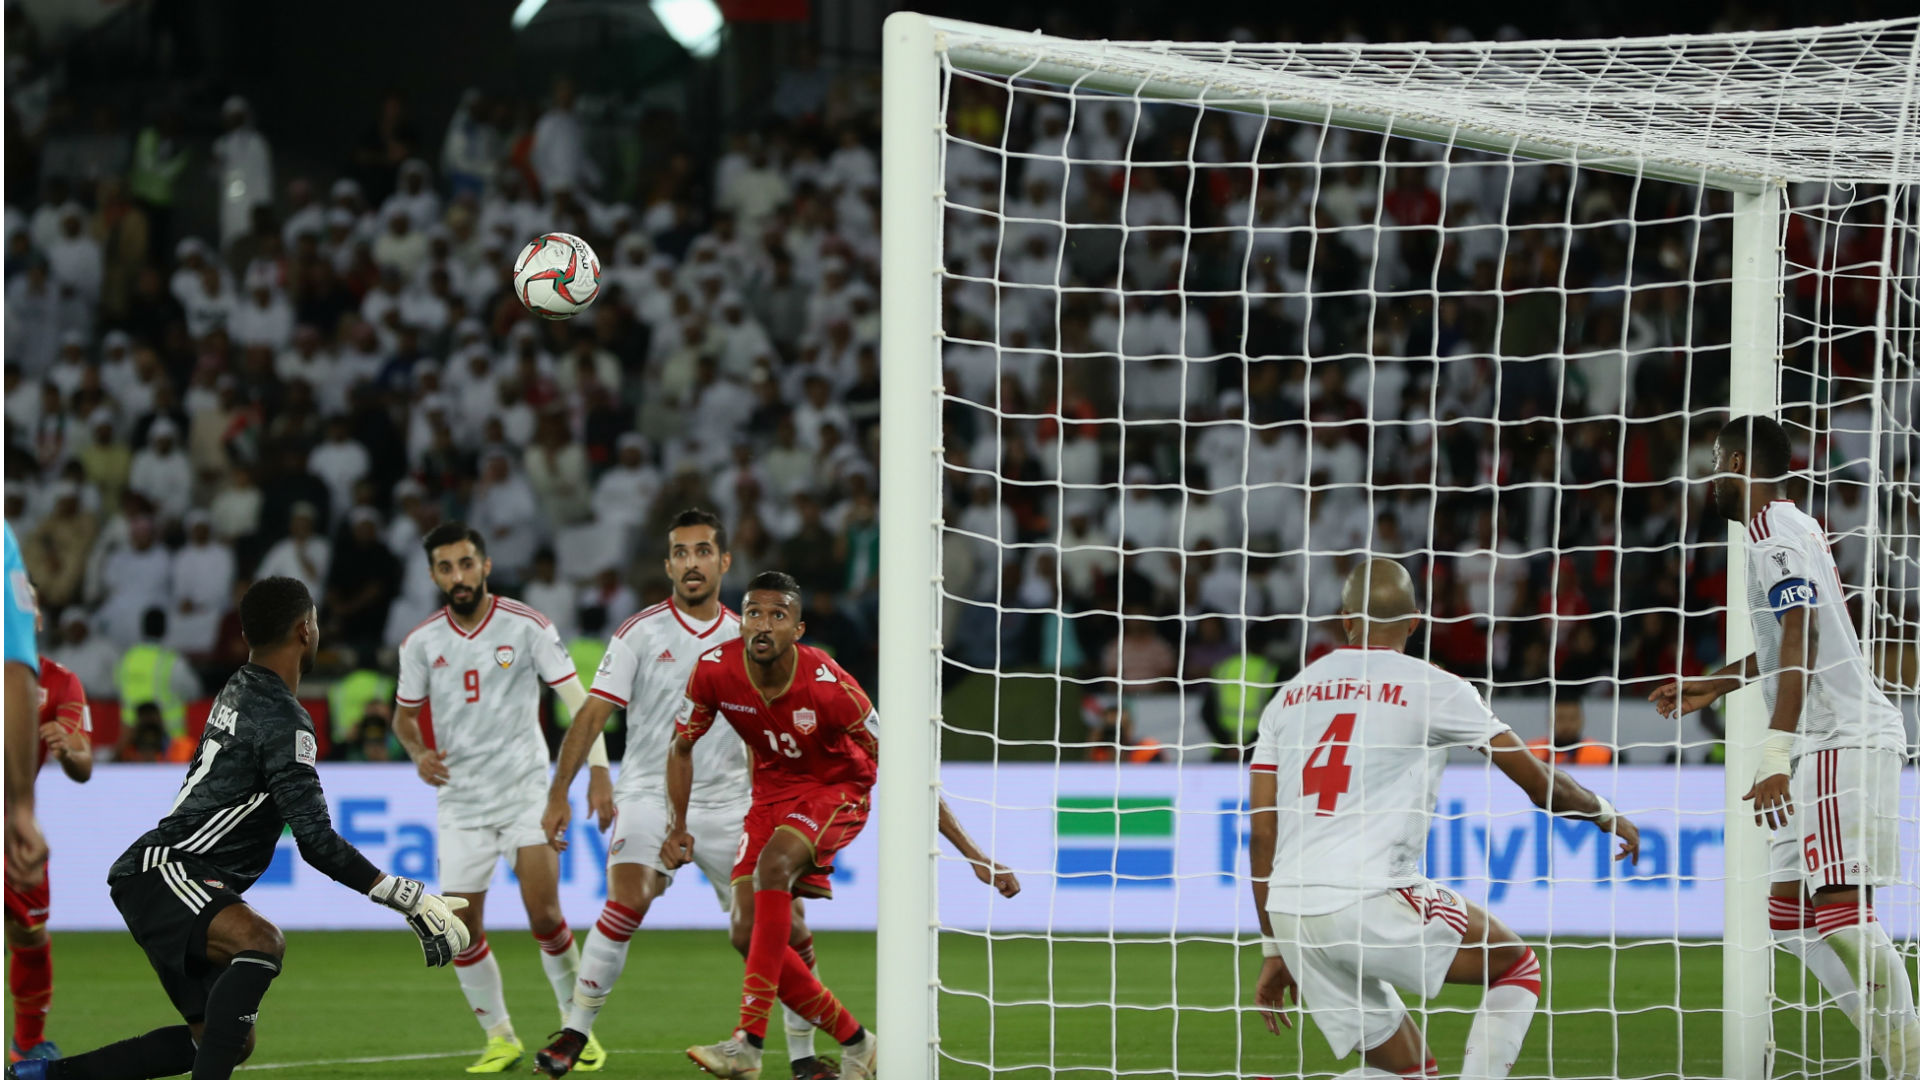 Late Khalil penalty salvages draw for host UAE